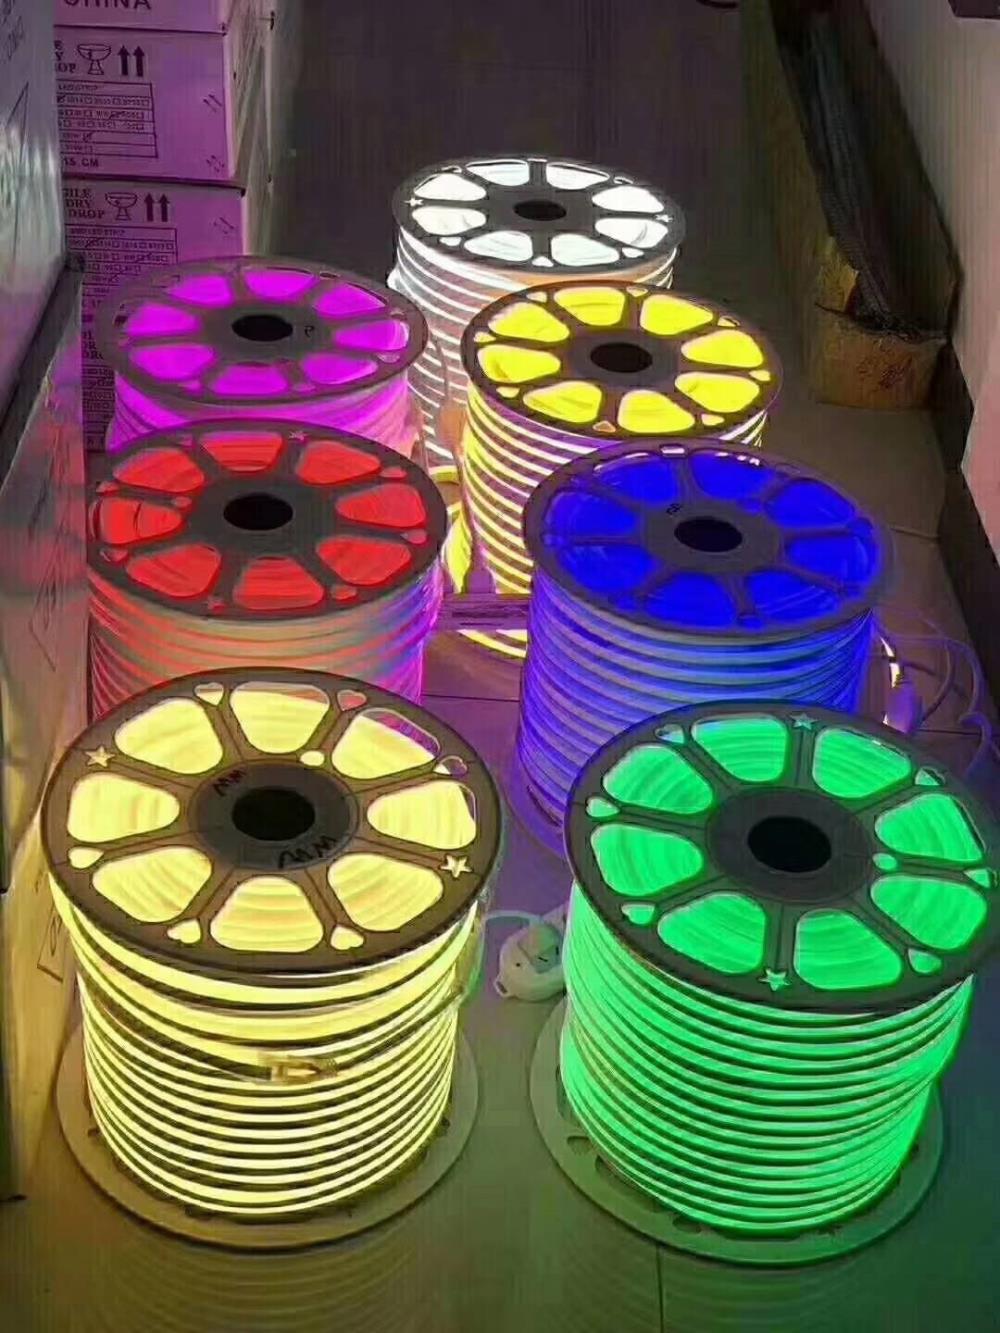 LED Strip ไฟ20M RGB 5050,LED Strip ไฟ20M RGB 5050, LED Strip Light USB 2835SMD, LED Strip Light ,RGB 5050/SMD2835,Strip,PLIGTHING,Plant and Facility Equipment/Facilities Equipment/Lights & Lighting